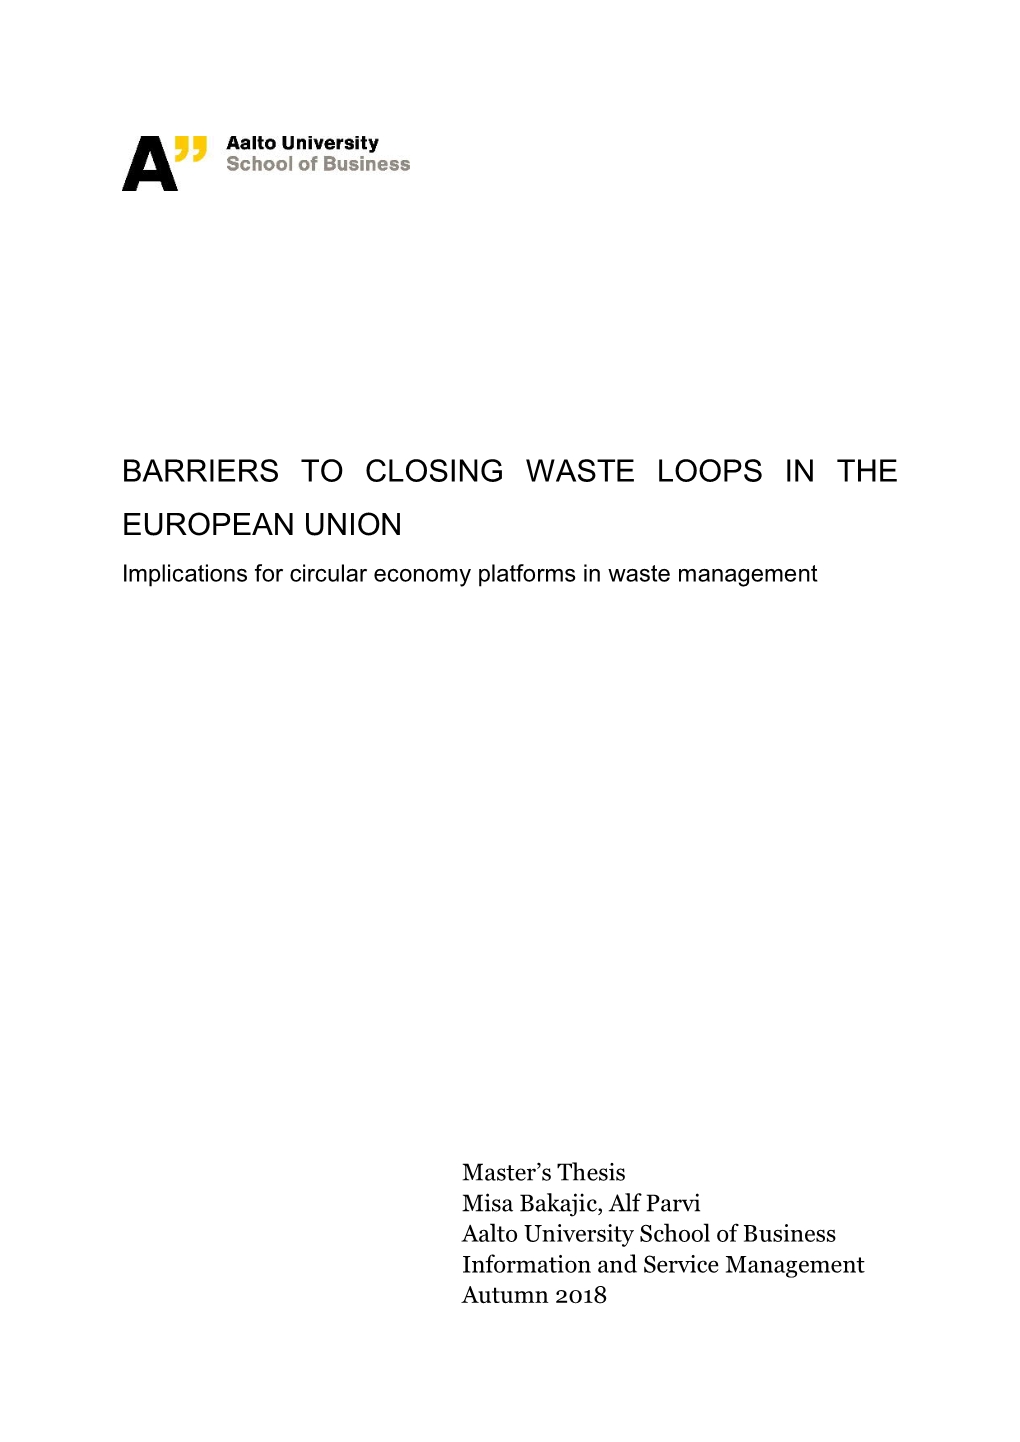 BARRIERS to CLOSING WASTE LOOPS in the EUROPEAN UNION Implications for Circular Economy Platforms in Waste Management